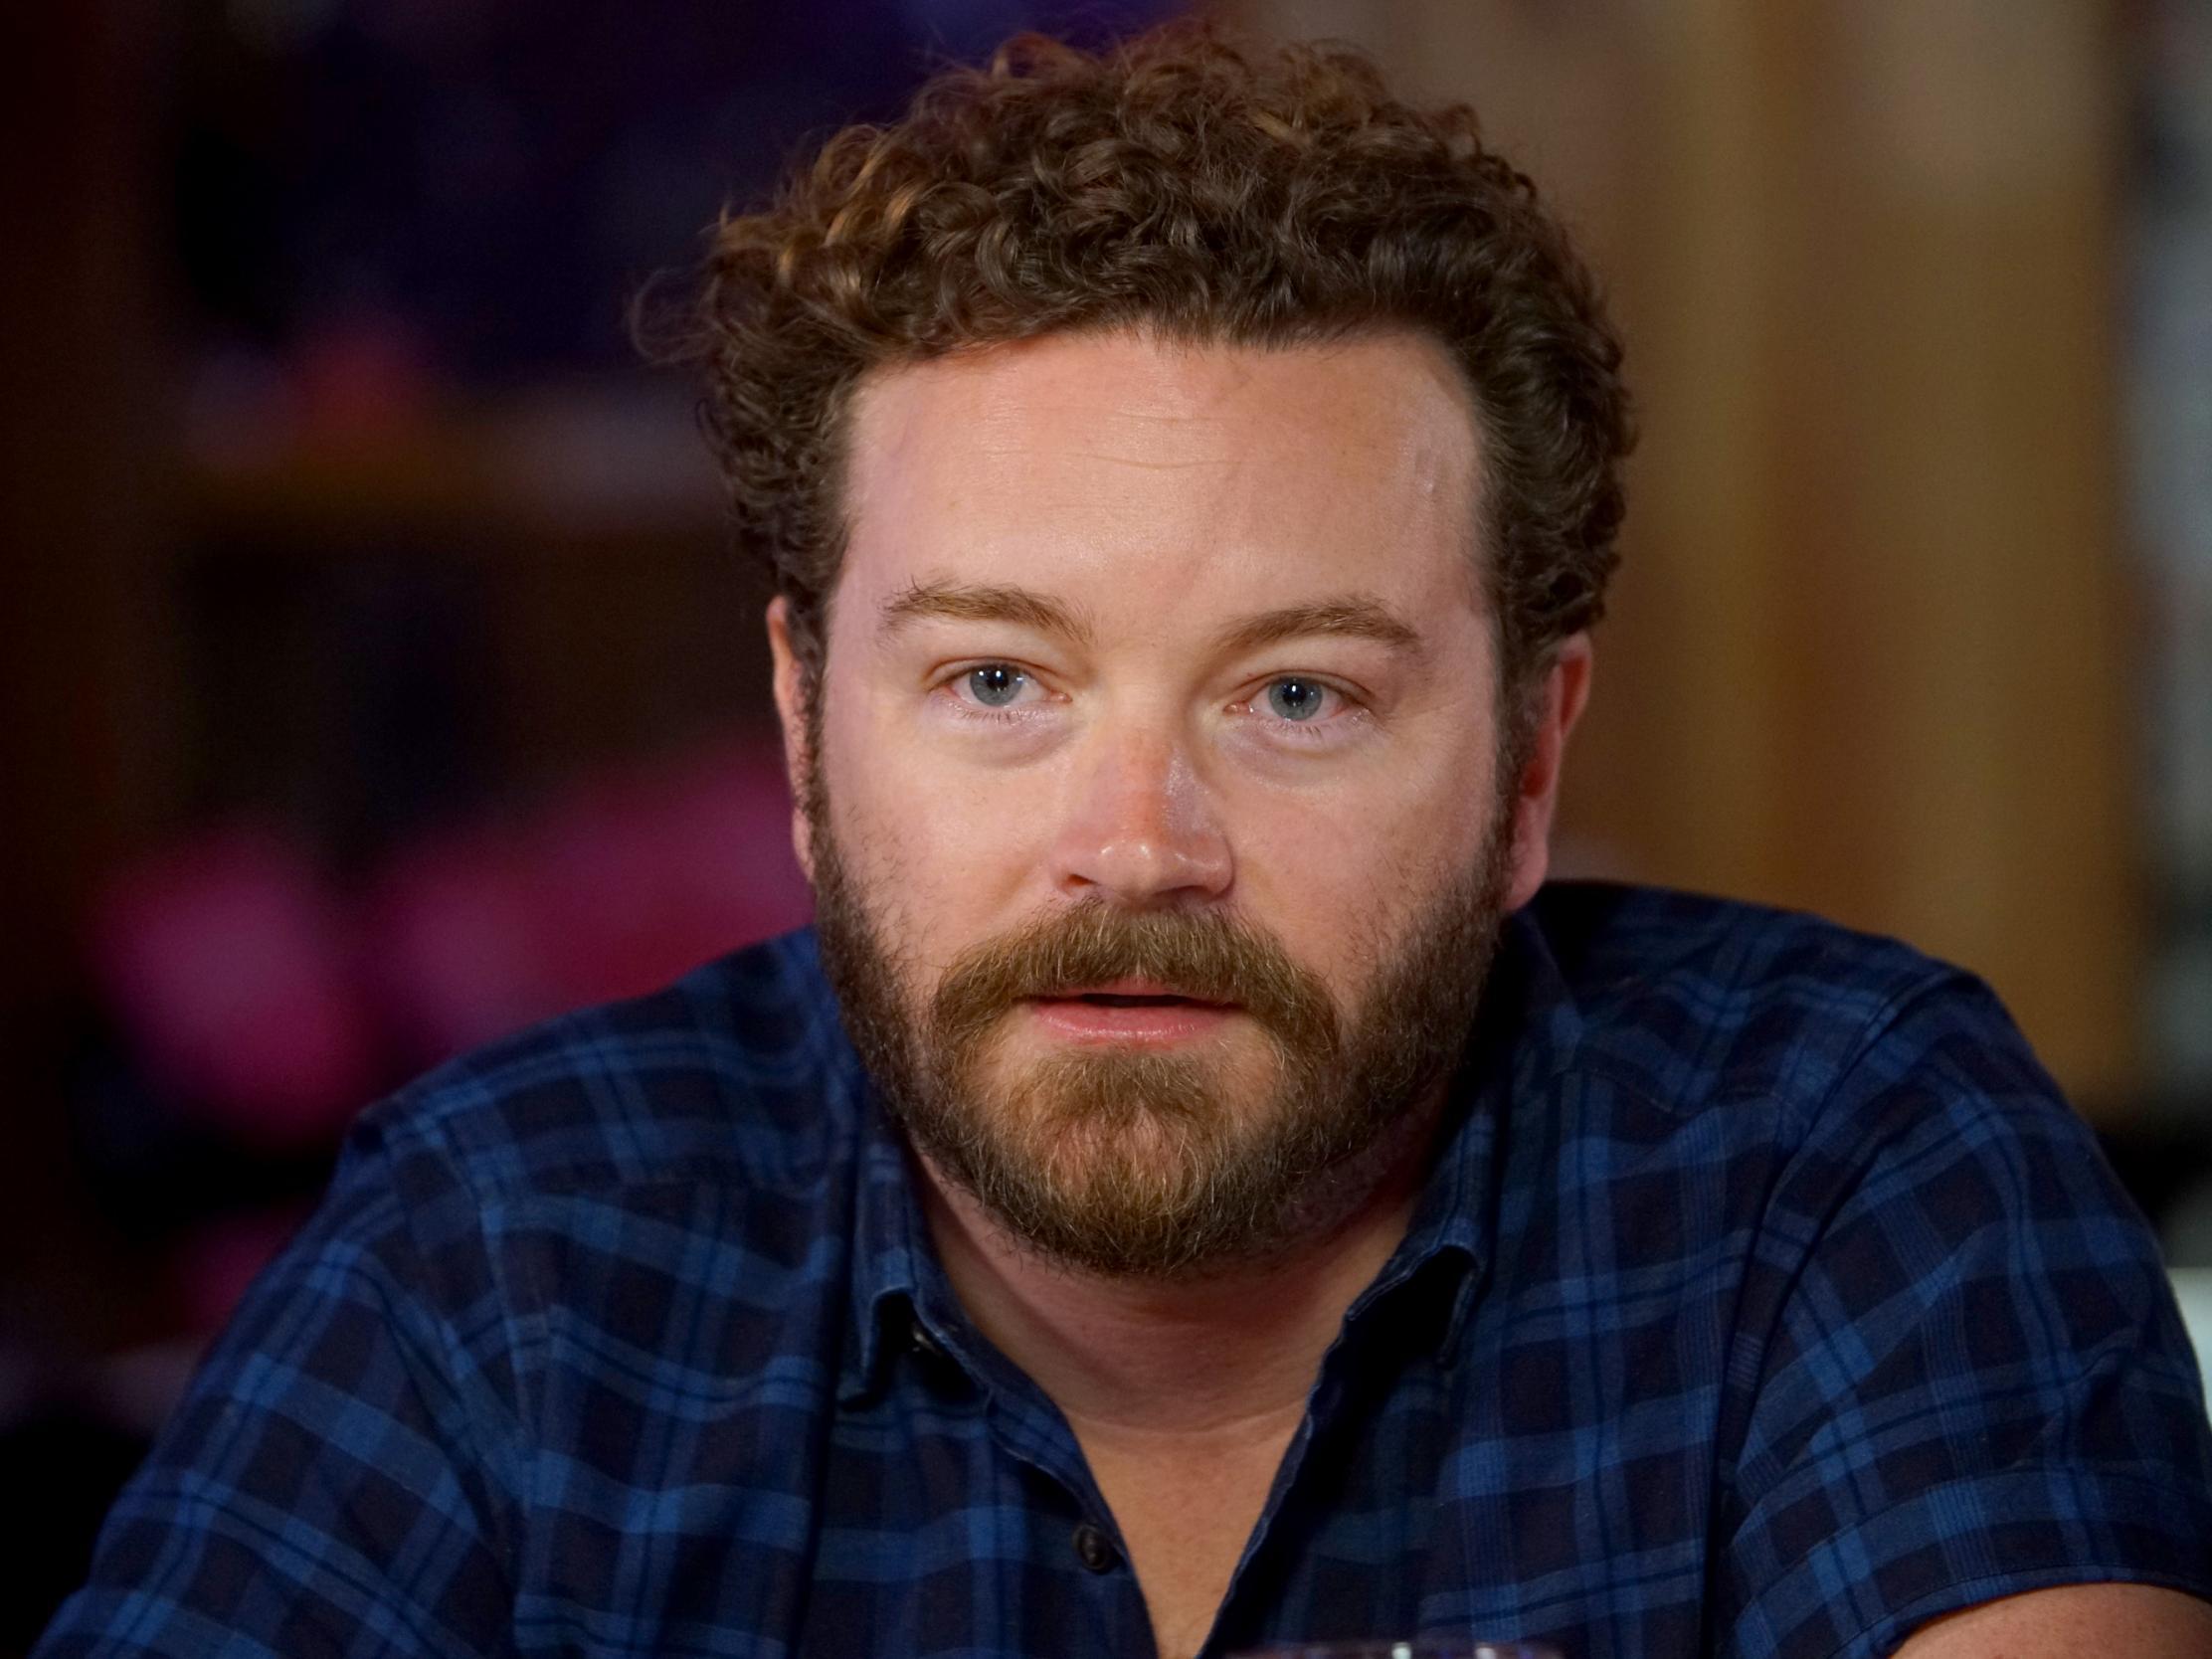 File image of actor Danny Masterson, pictured in June 2017.